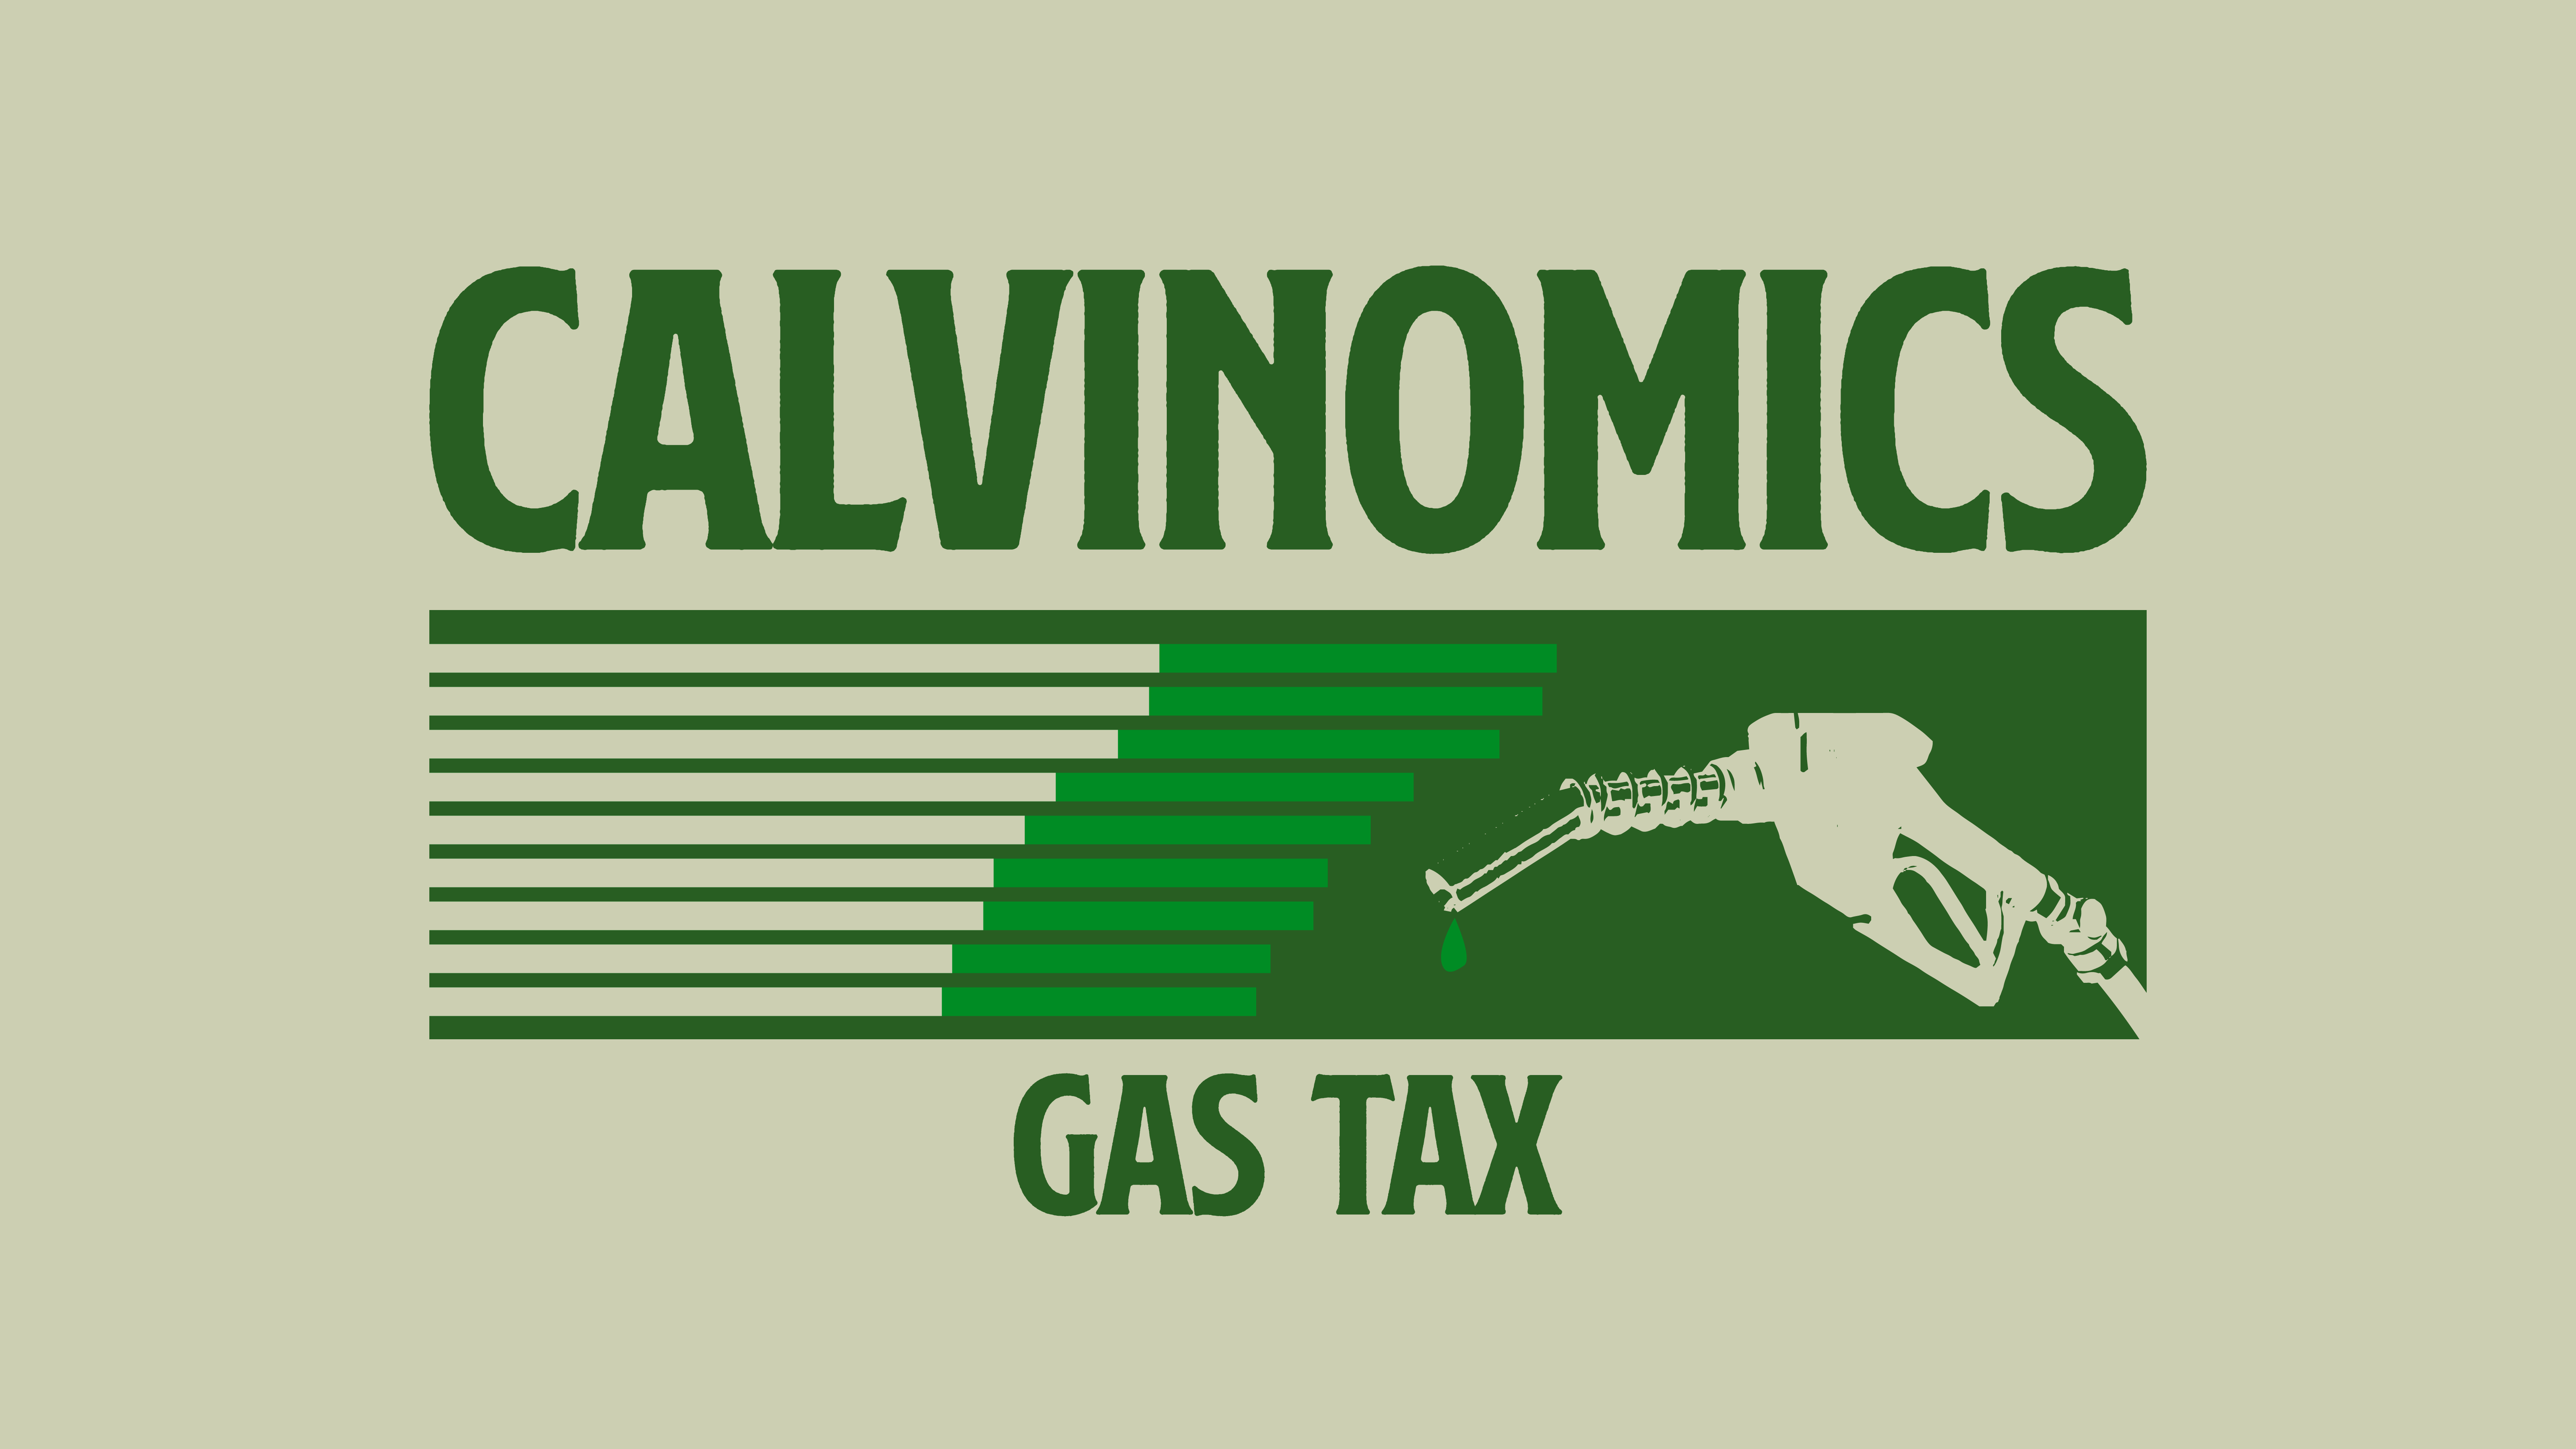 green text on light green background saying Calvinomics gas tax wit dark green bar graph and light green gas nozzle